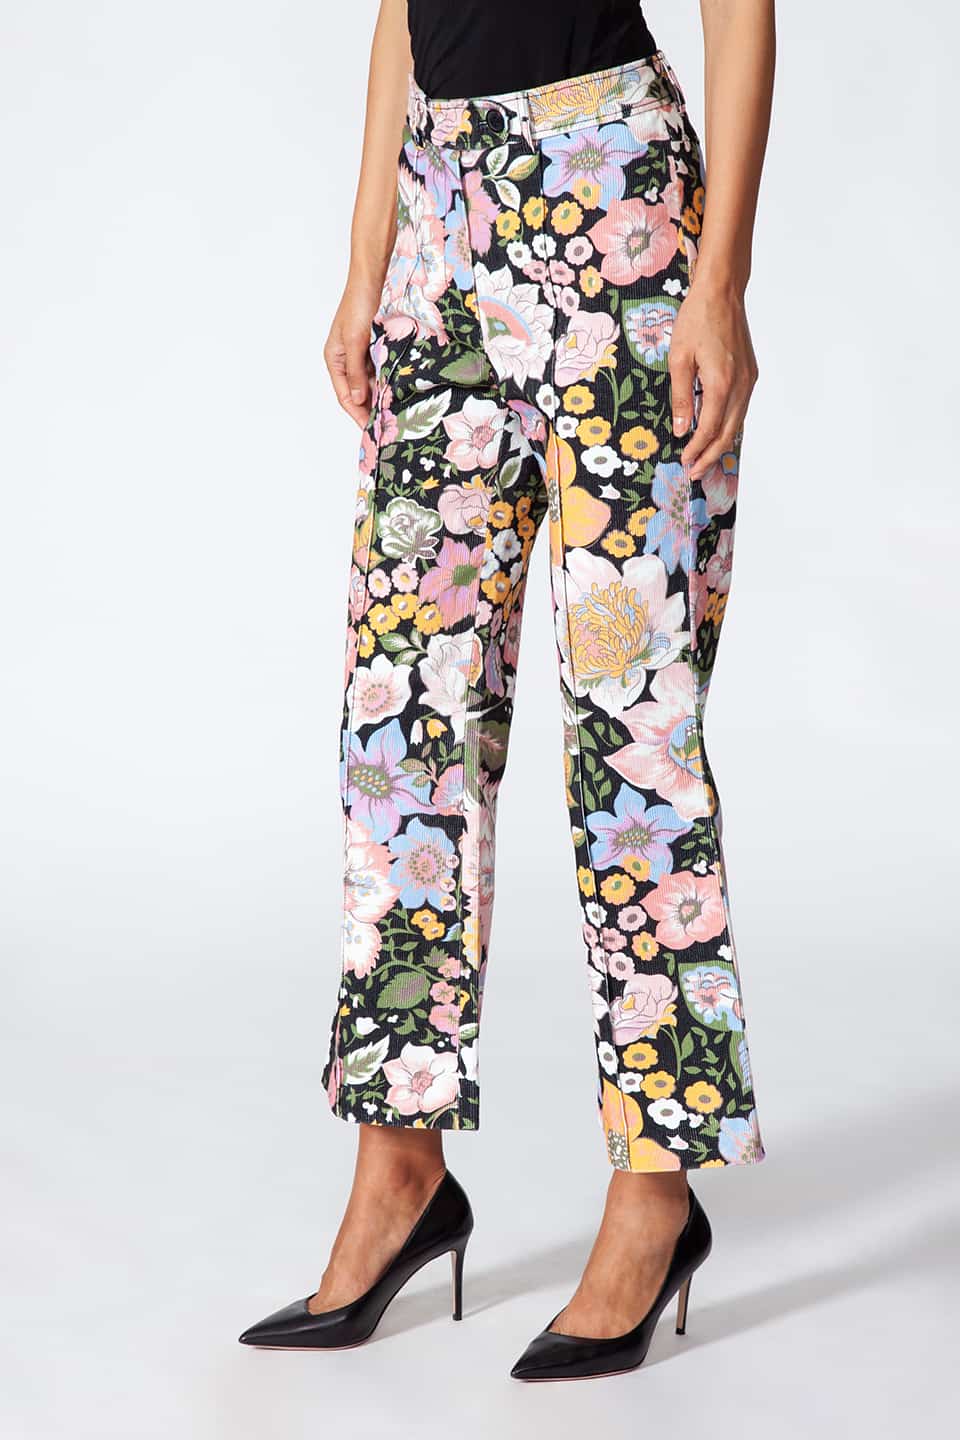 Model showing Manoush European stylist's flare trousers in corduroy with floral print, in pose from a detailed side view